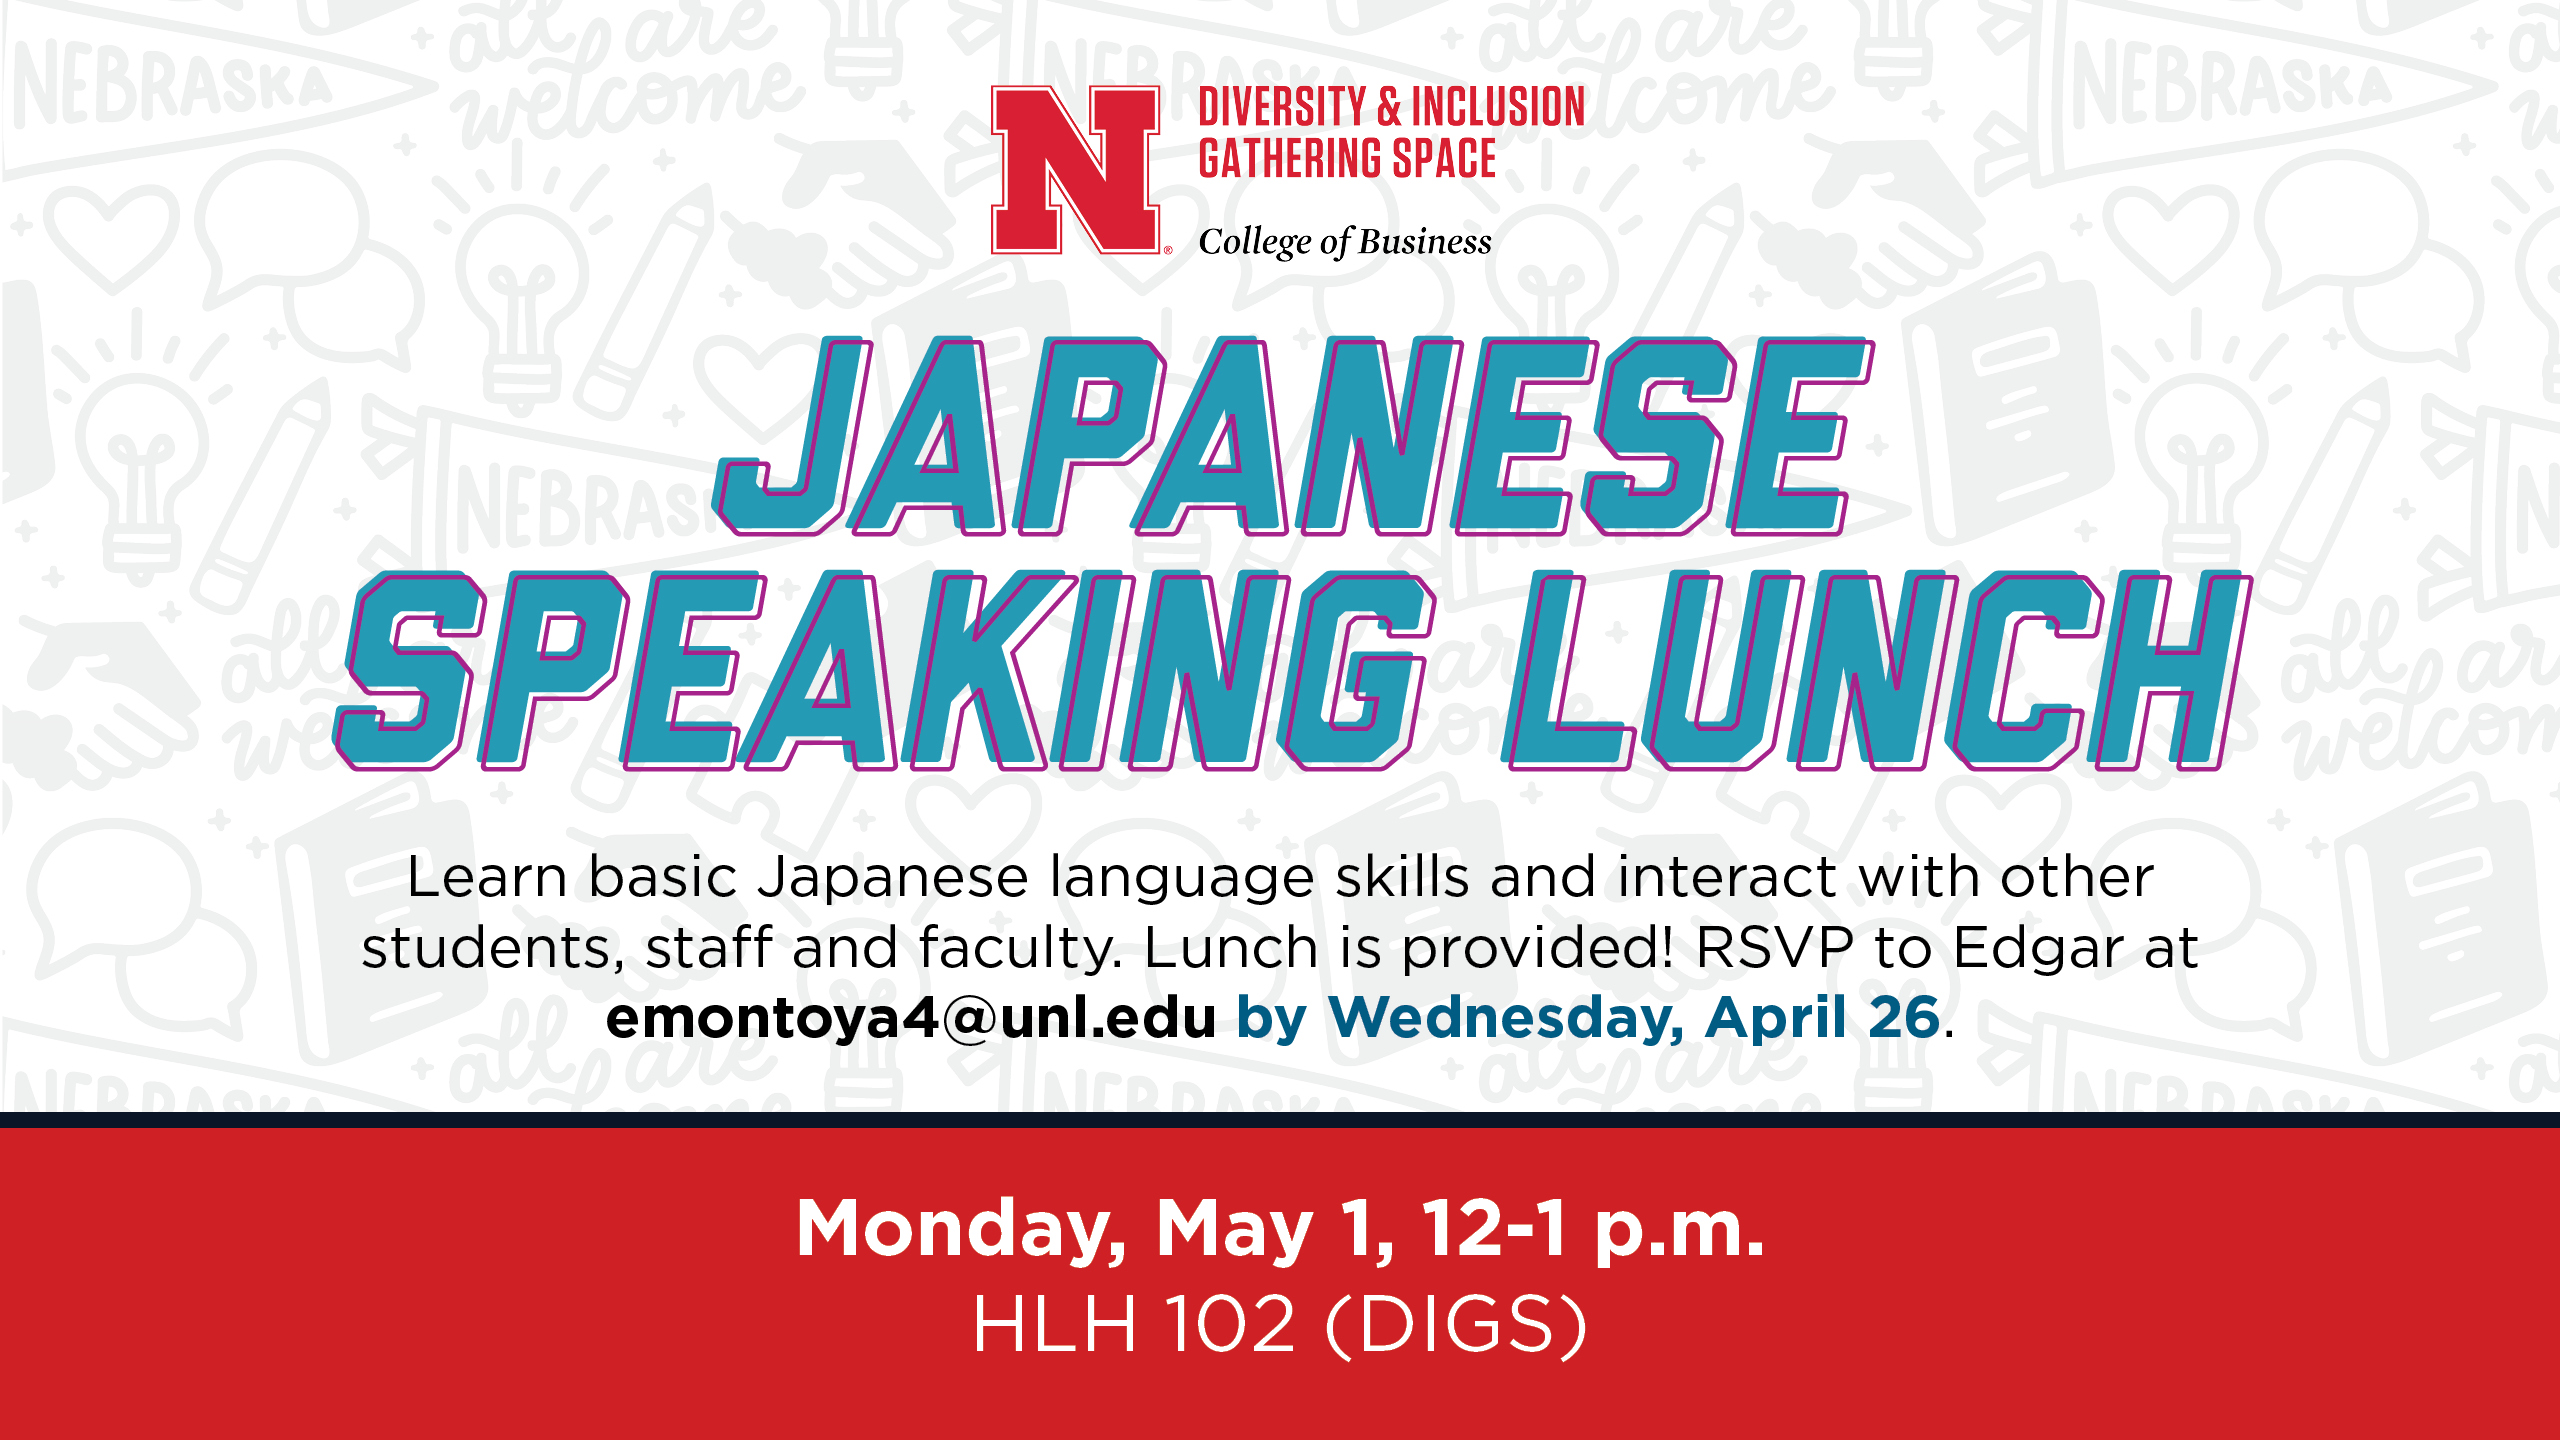 Japanese Speaking Lunch | Monday, May 1 from 12-1 p.m. | HLH 102